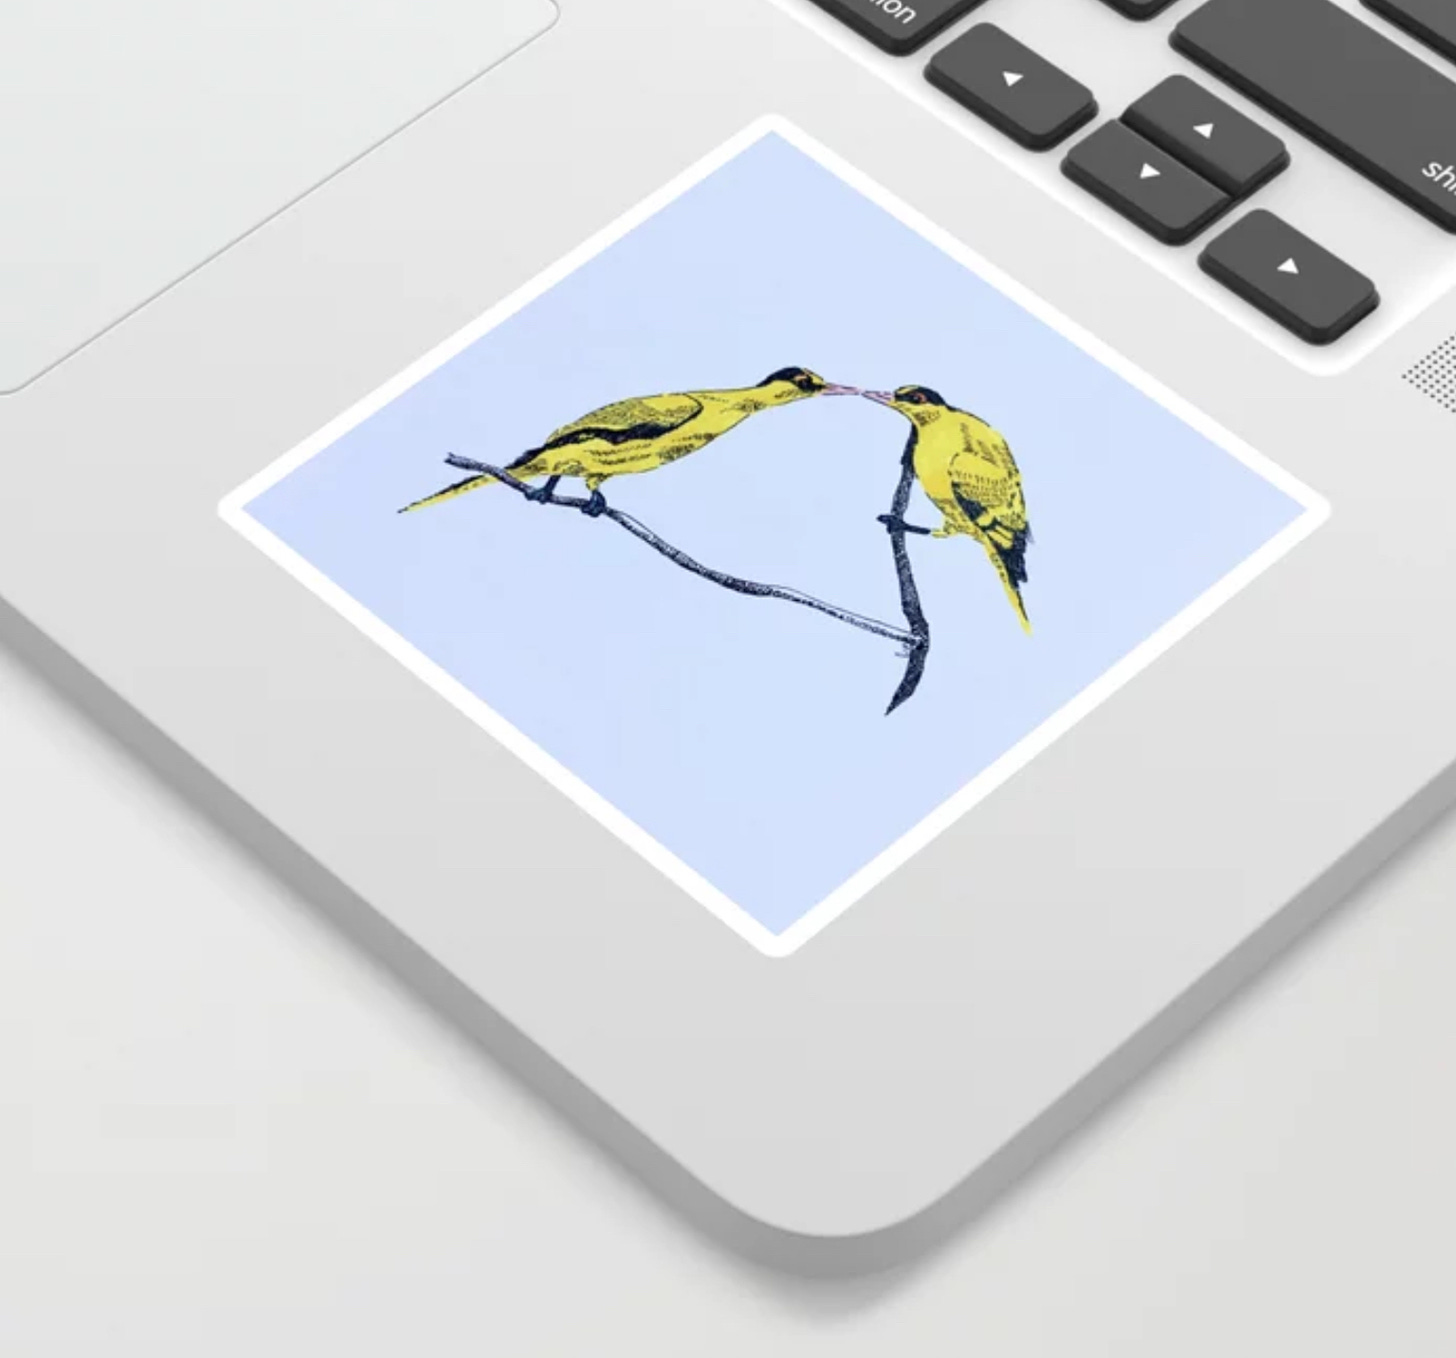 photo of Commitment art as a sticker on a laptop. Two bright yellow black-naked oriole birds perched on a branch, with their beaks touching, like kissing